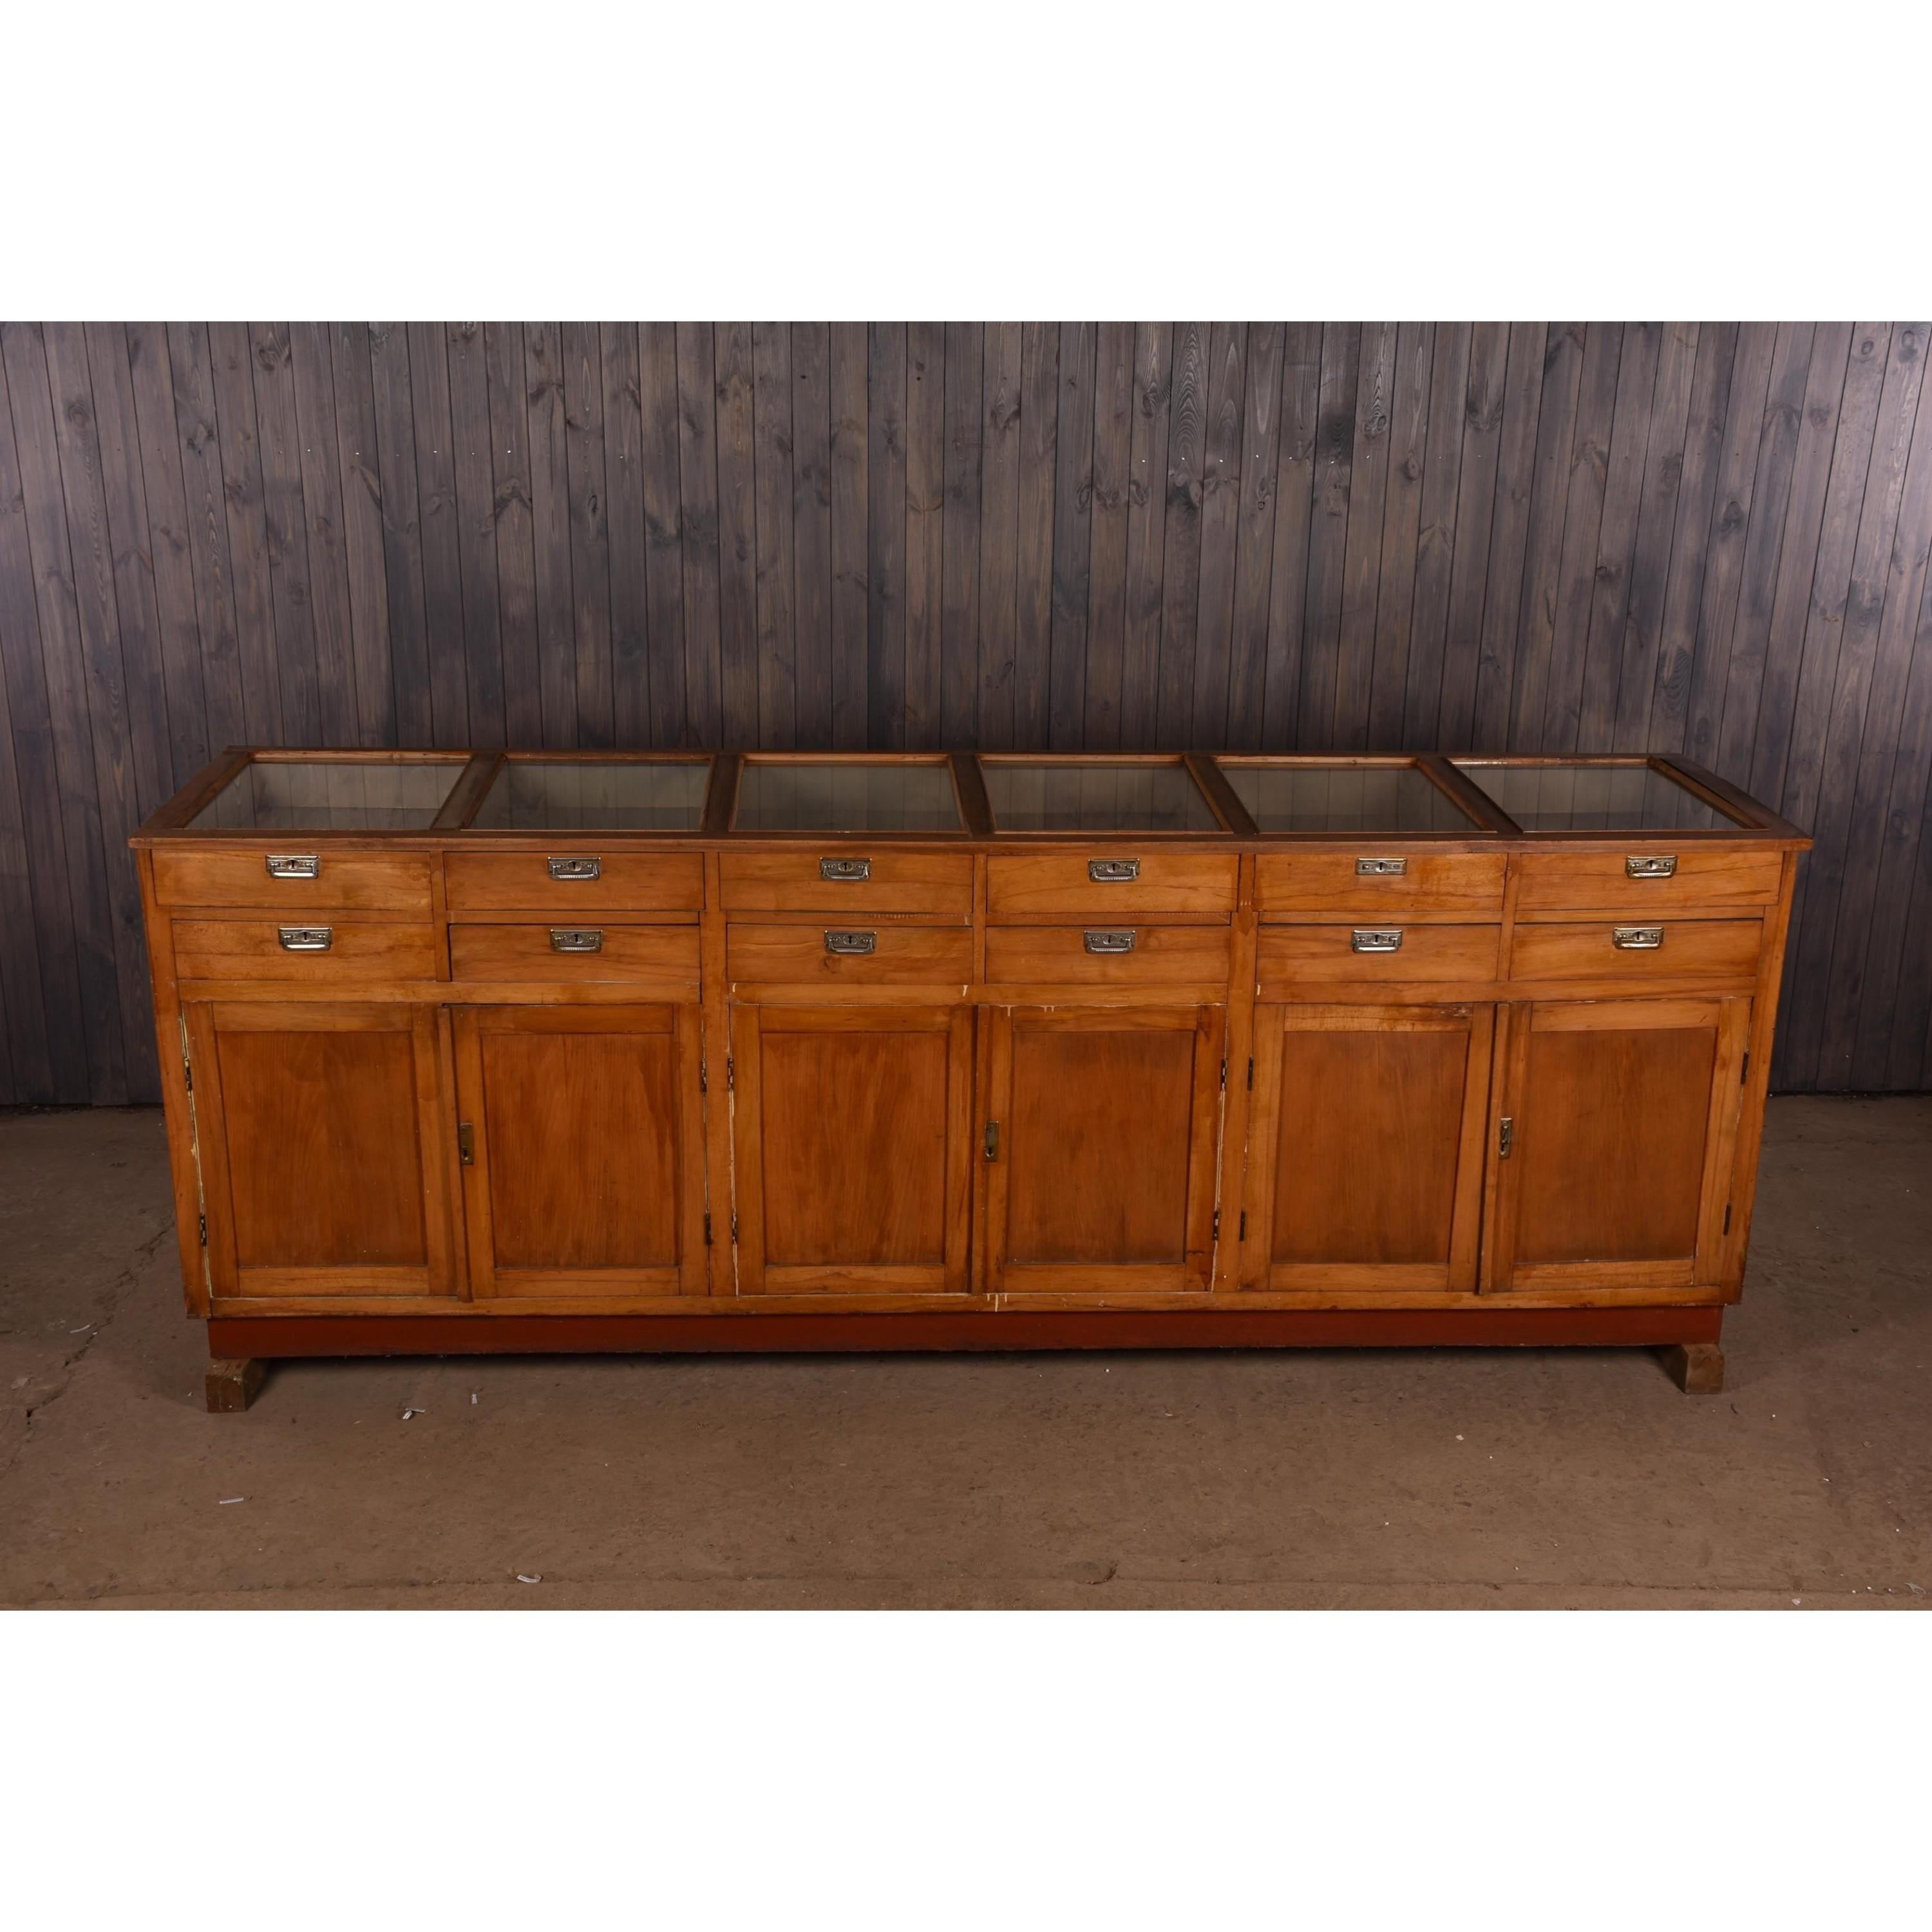 Industrial Apothecary Haberdashery Display Counter Sideboard circa 1930s Number 13